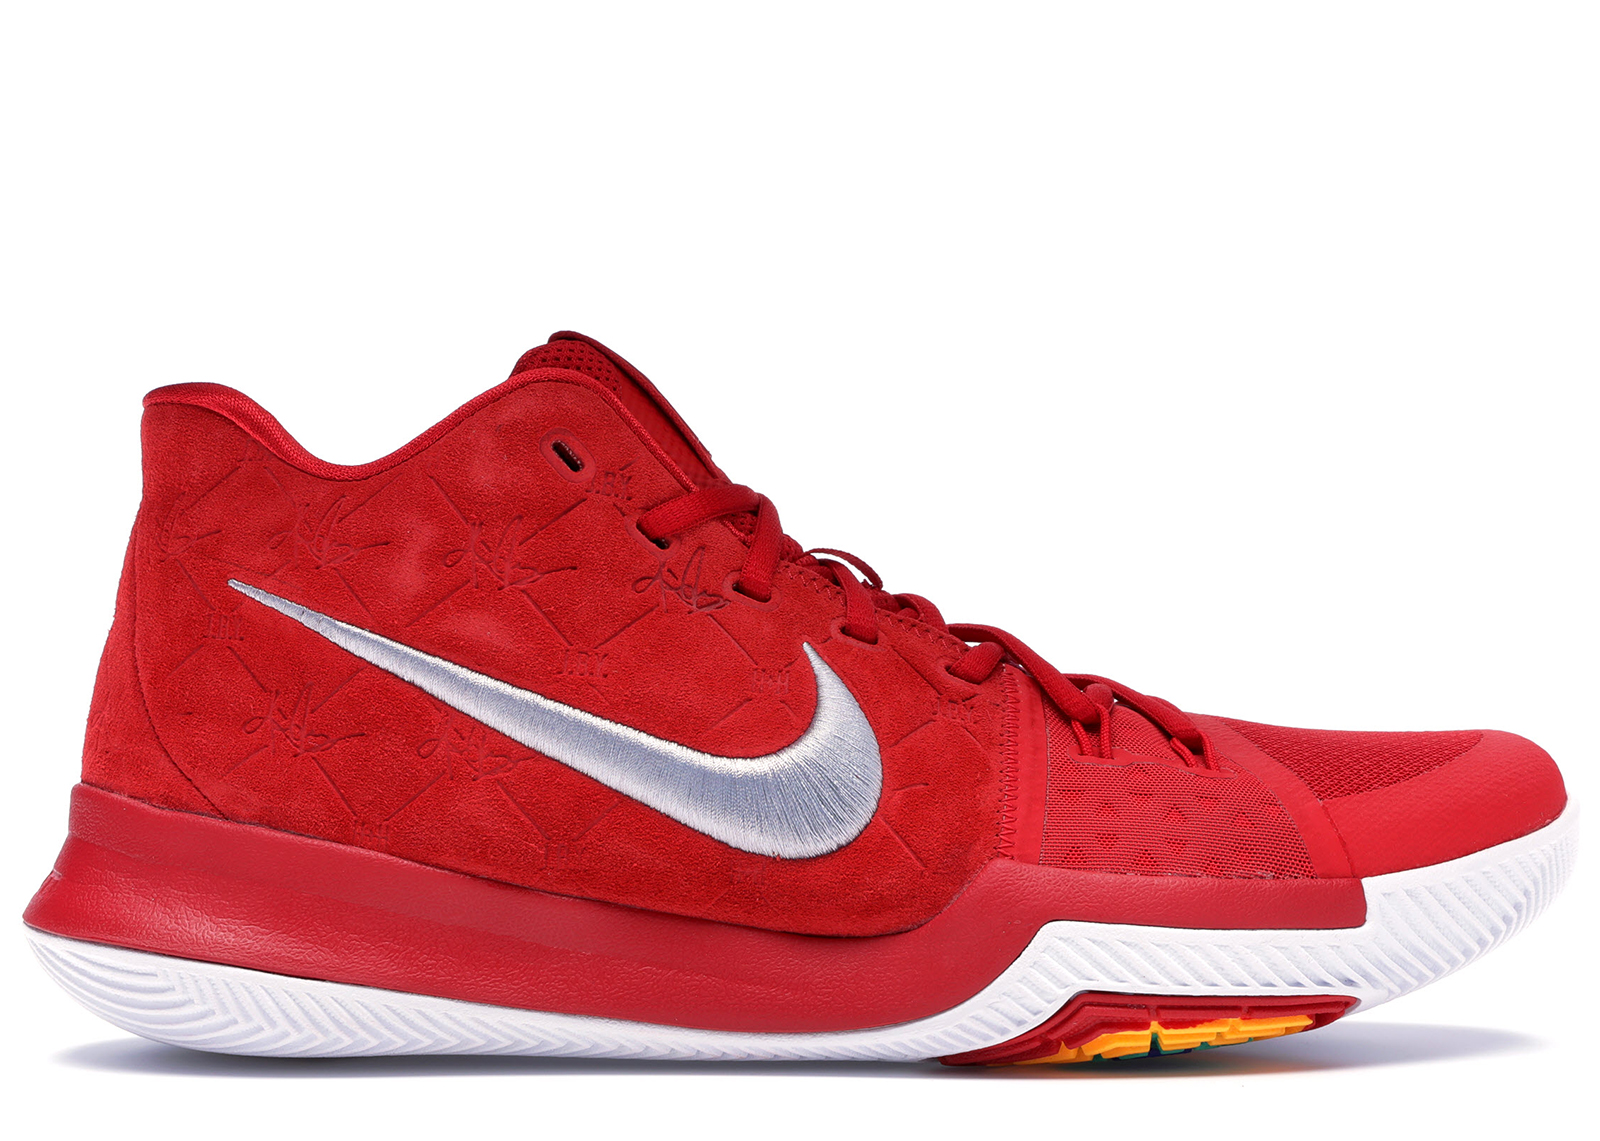 kyrie irving all red shoes